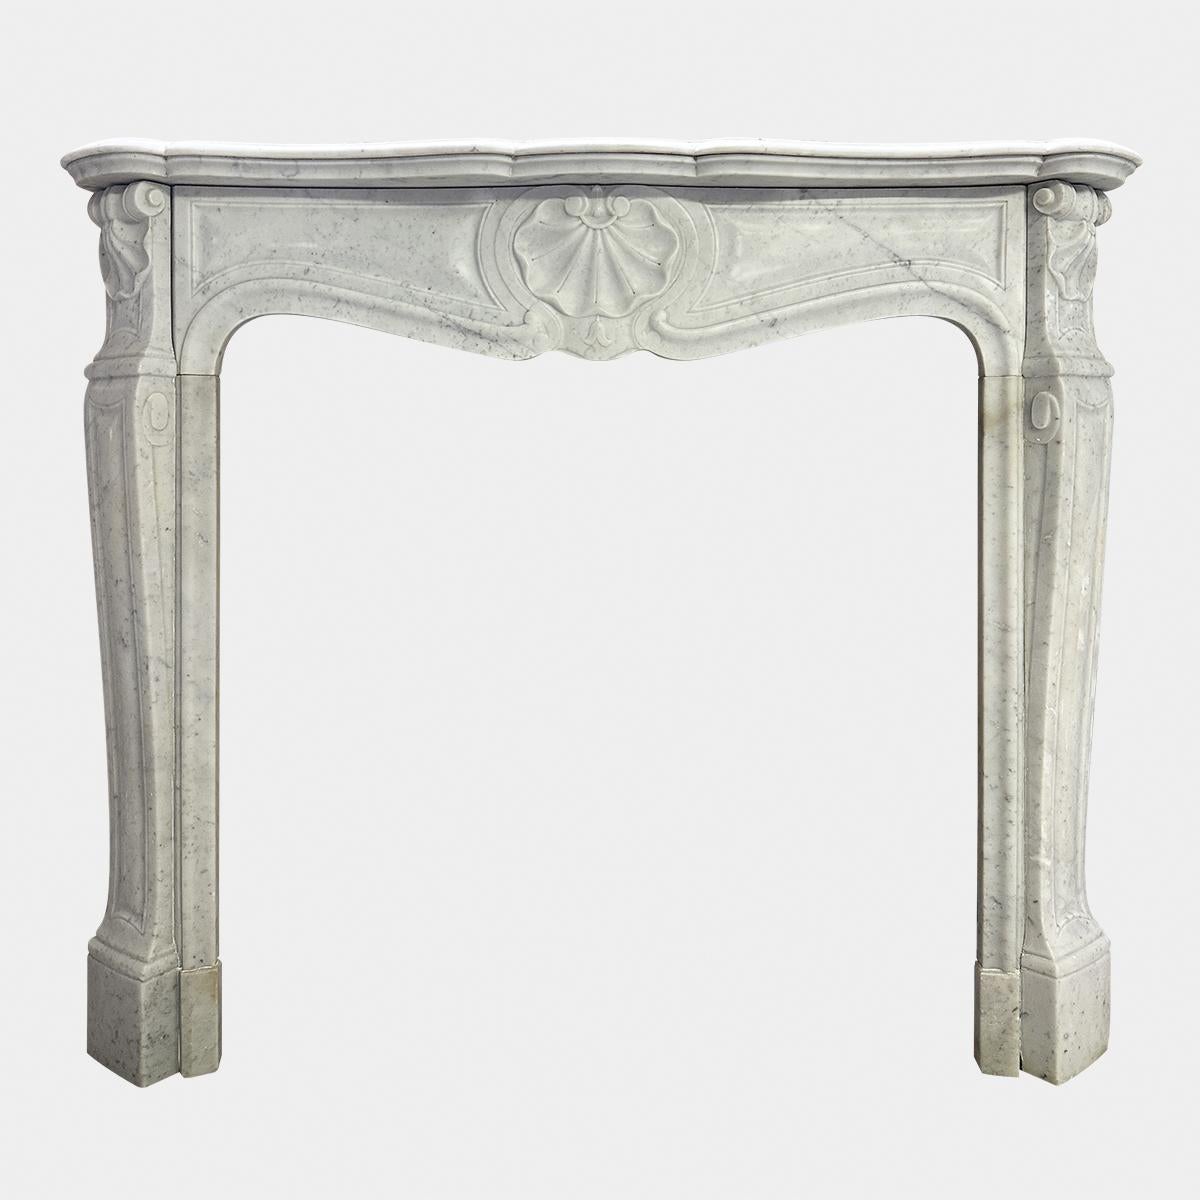 An attractive Louis XV style 3 shell Carrara marble fireplace from the mid 19th century. The panelled legs with carved shell end blocks, the serpentine frieze again panelled with central carved shell cartouche. All beneath a deep serpentine shelf,